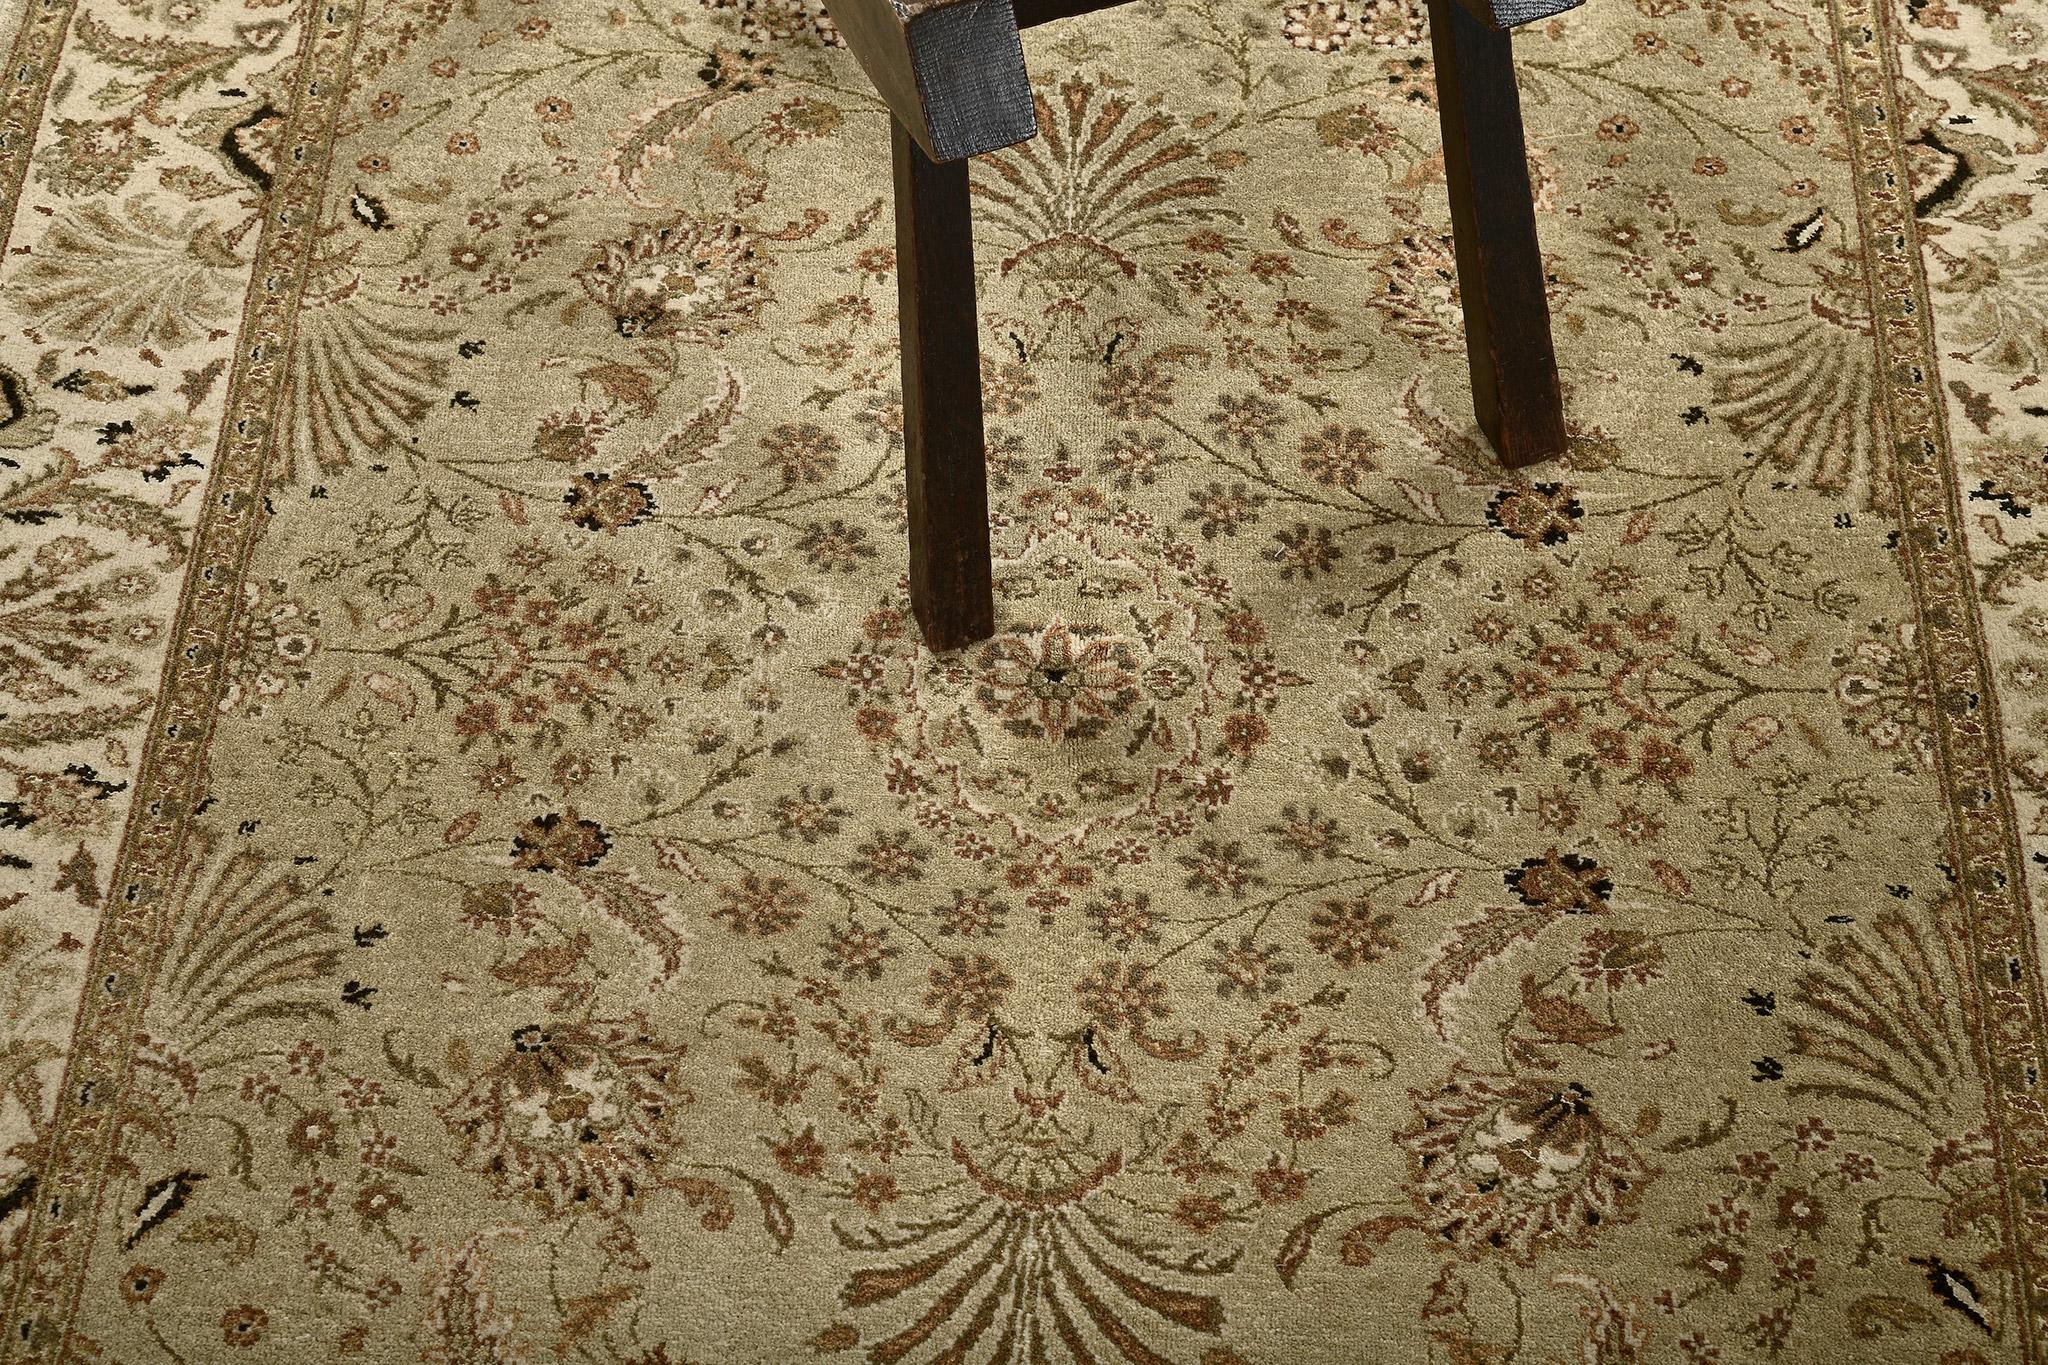 An elegant revival of Tabriz Hadji Jalili rug that gracefully establishes sophistication through the all over botanical petterns of the blooming palmettes, serrated leaves, leafy tendrils and feather-like motifs. Flanked by inner and outer floral